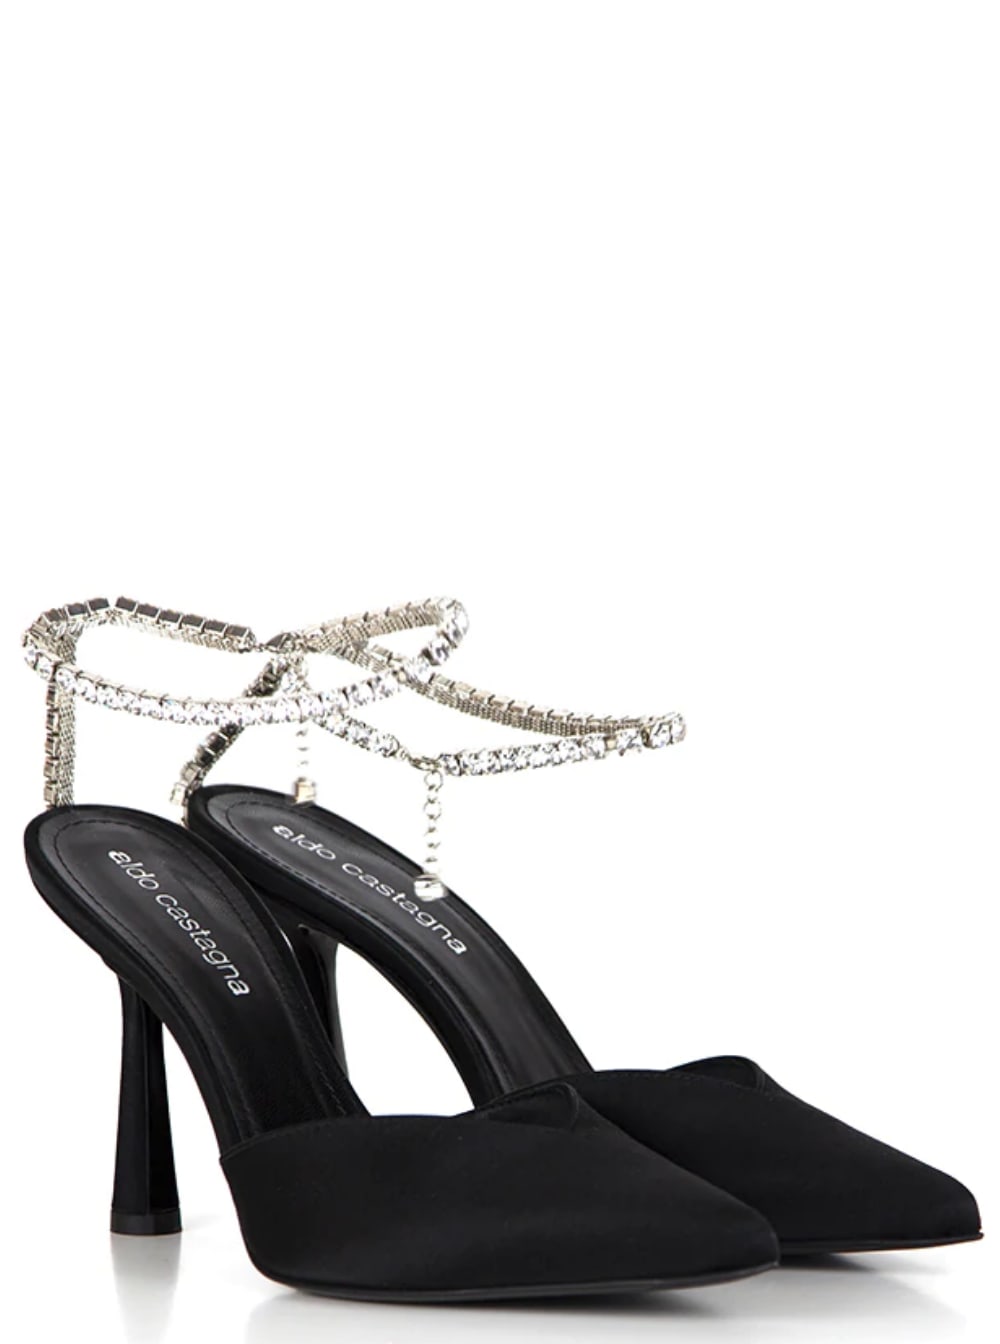 Aldo Castagna Womans Emily Silk Satin And Leather Pumps With Crystal Ankle Strap